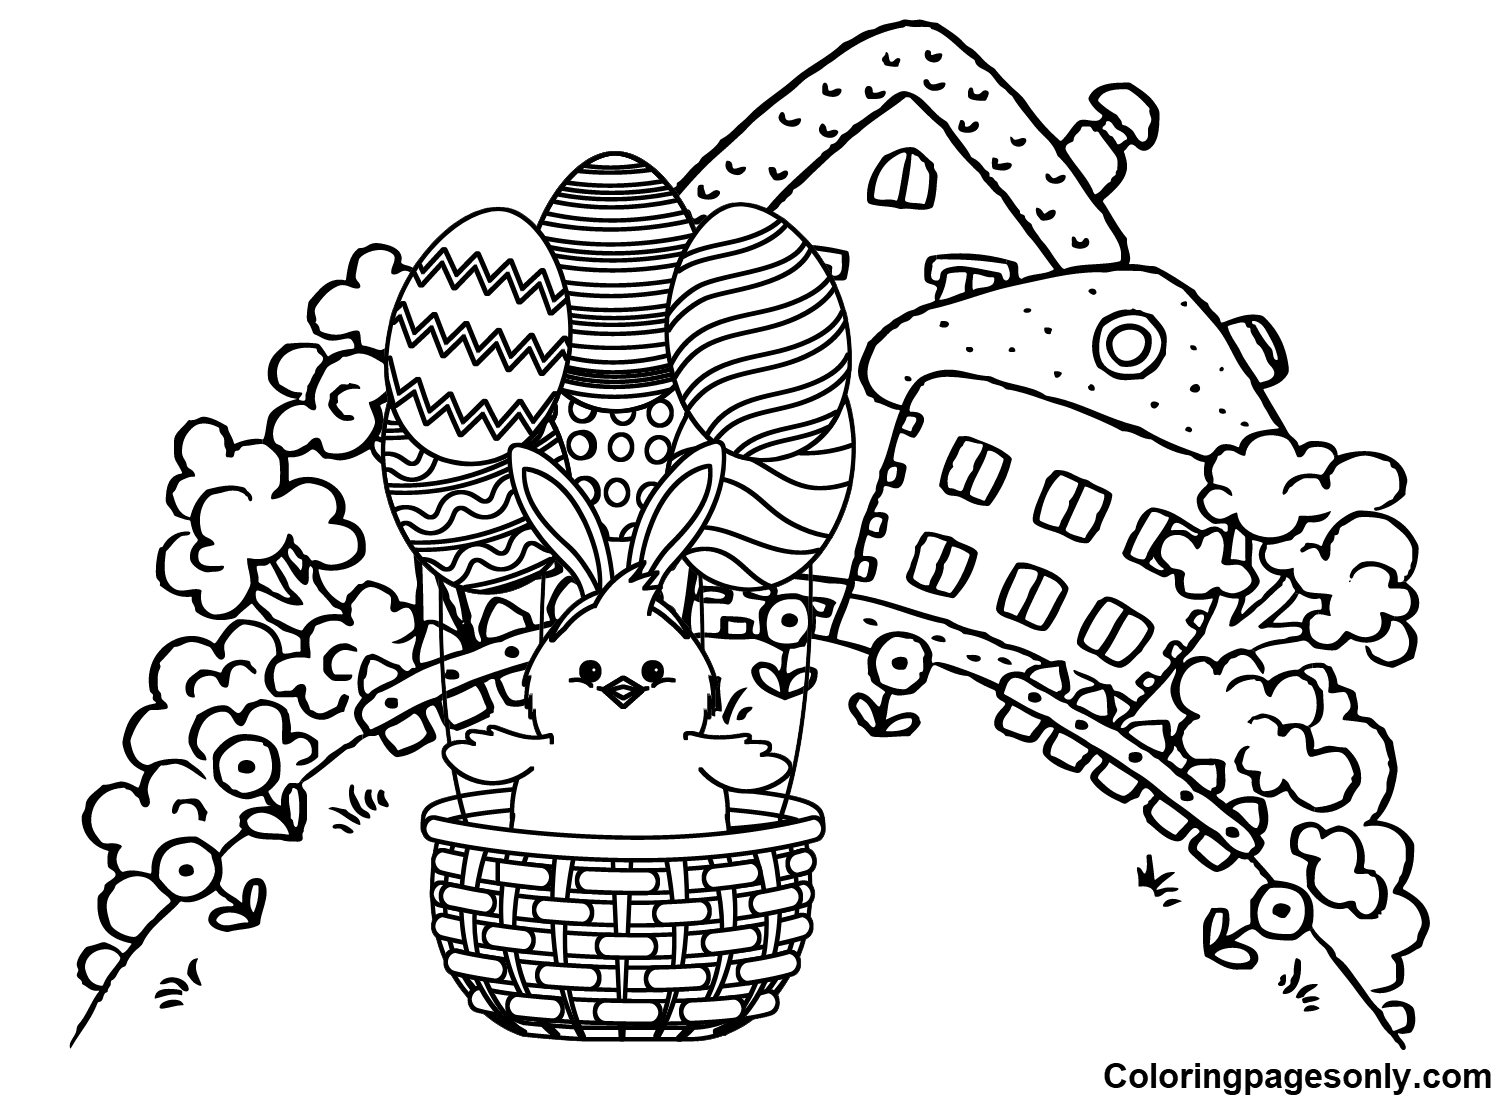 Cute Easter Chick Coloring Pages